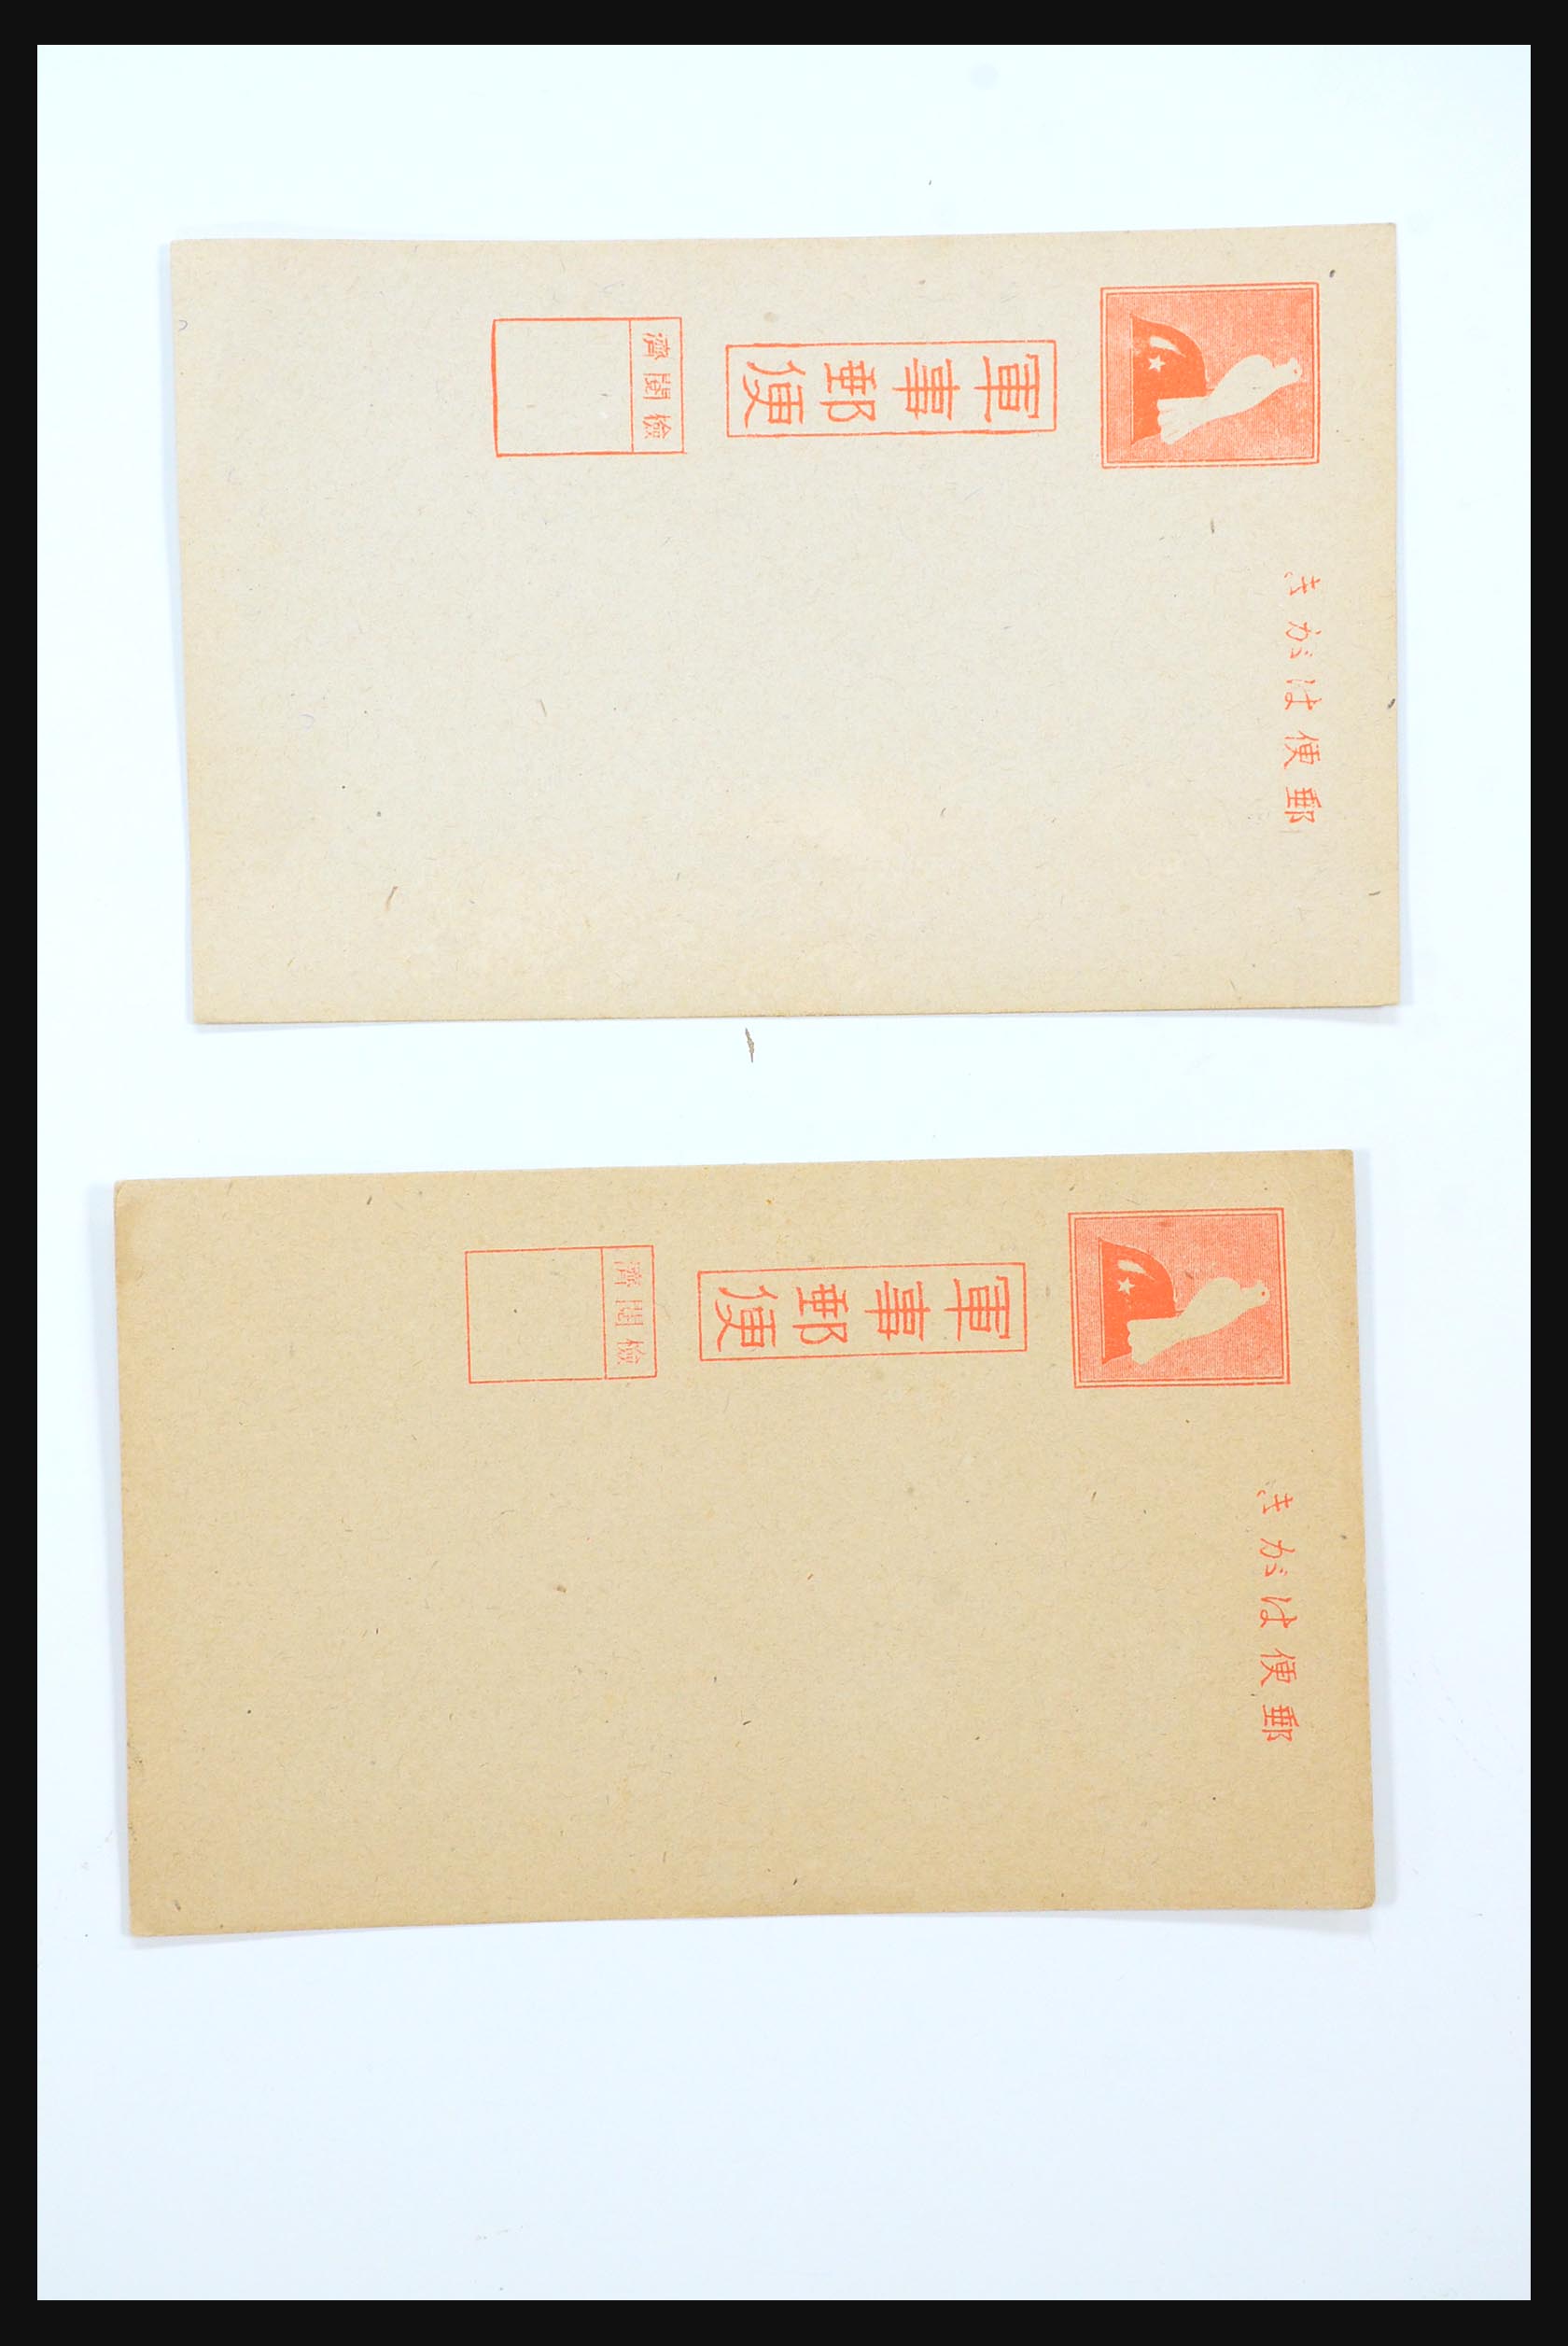 31362 050 - 31362 Netherlands Indies Japanese occupation covers 1942-1945.